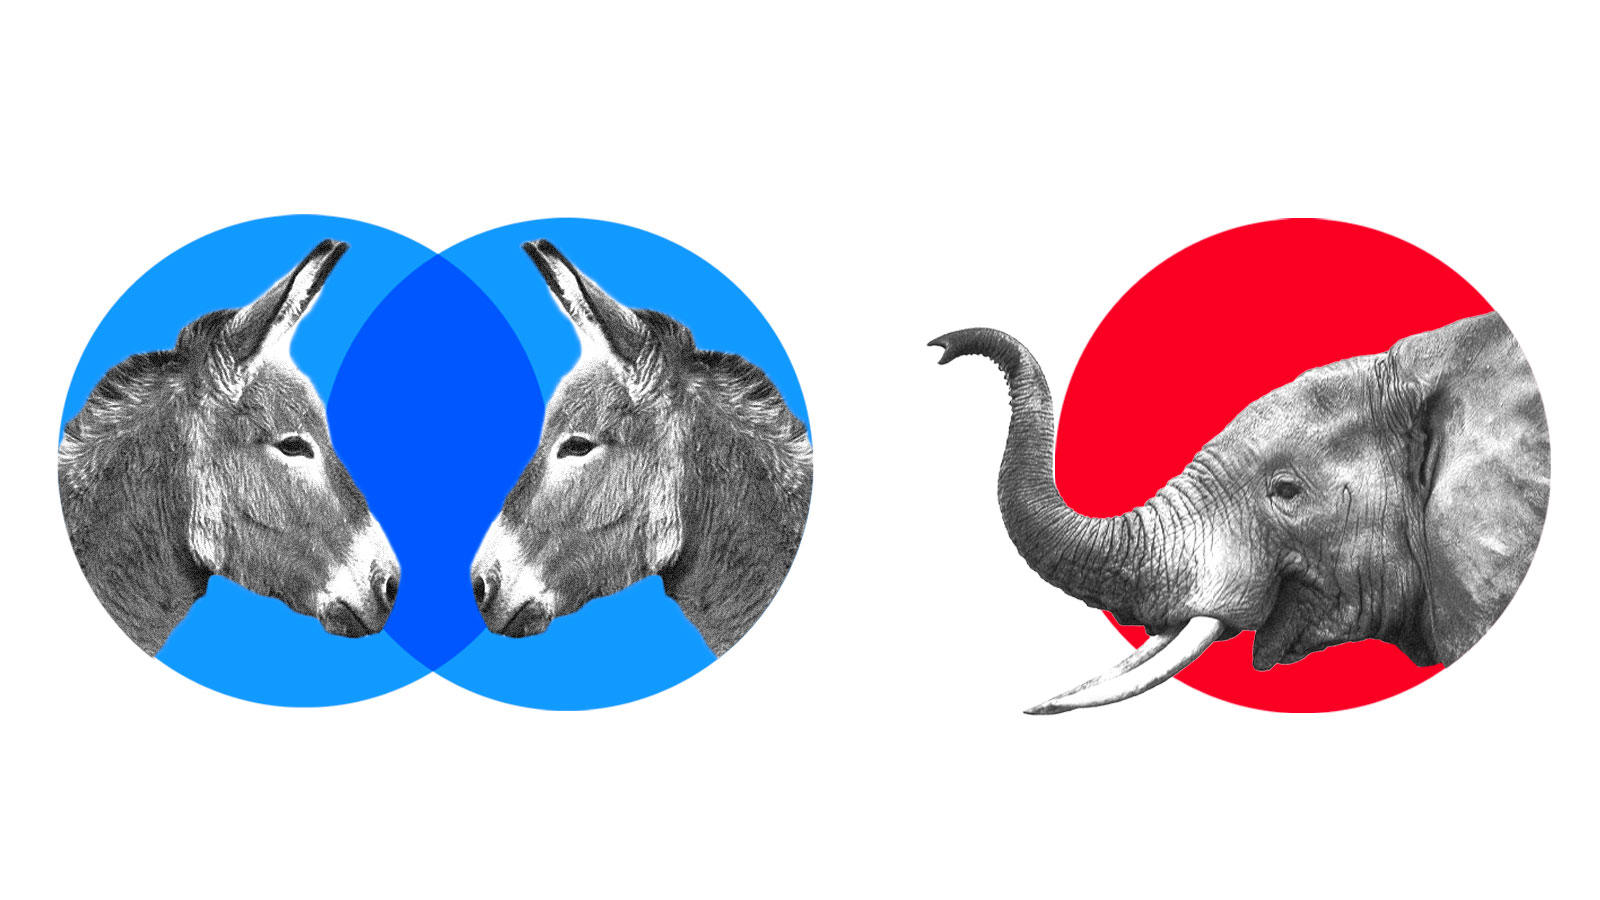 Collage: Two donkeys in two blue intersecting circles and an elephant in one red circle